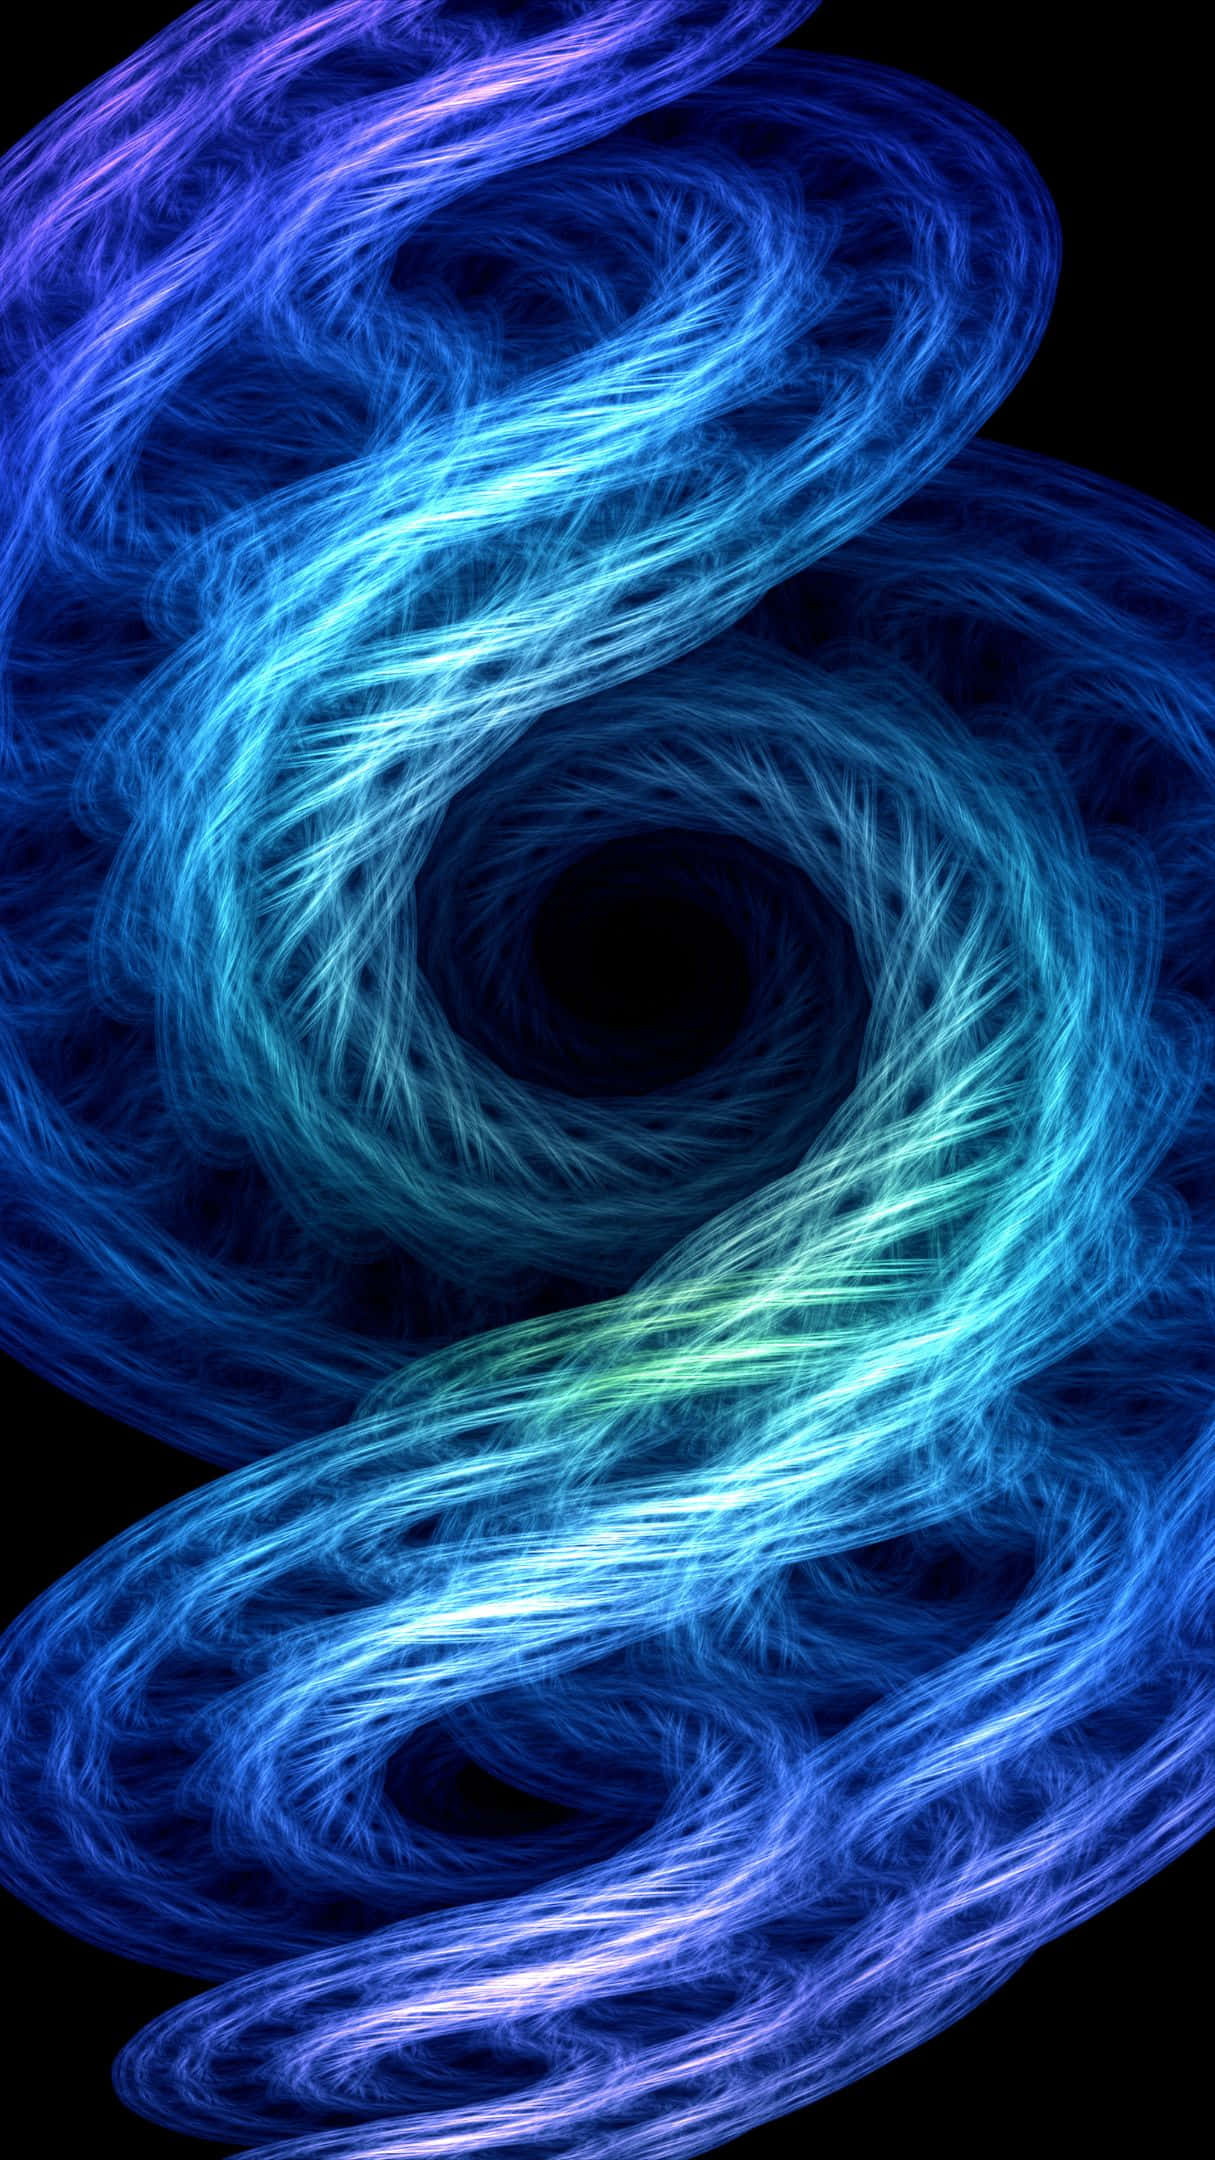 Download Blue Swirl Background | Wallpapers.com